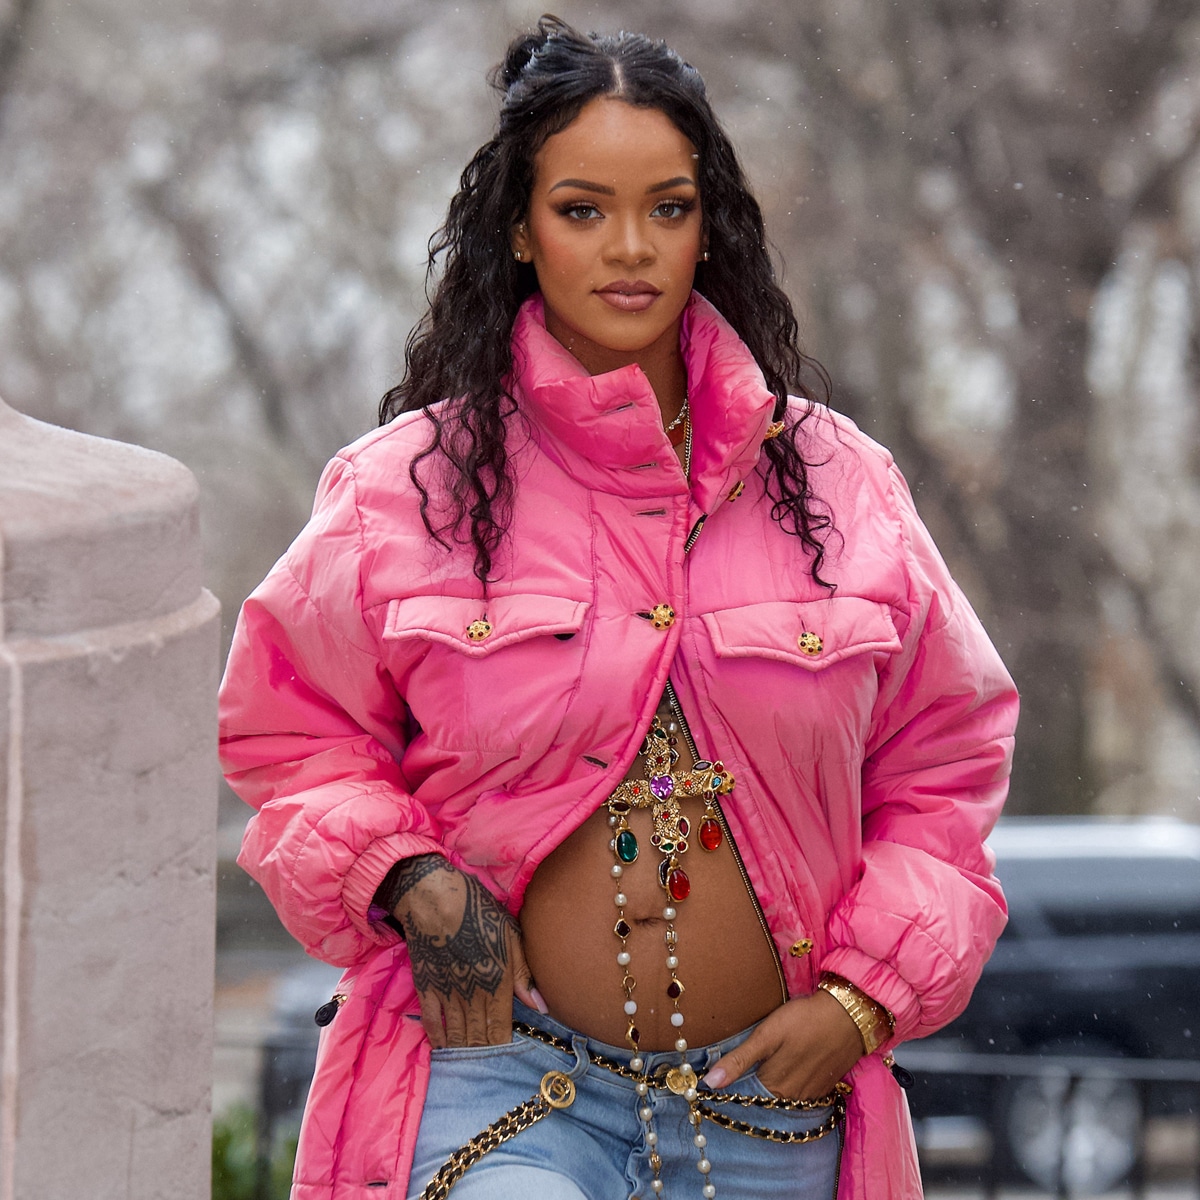 Rihanna Is Pregnant! Singer and Fashion Icon Expecting First Baby with A$AP Rocky